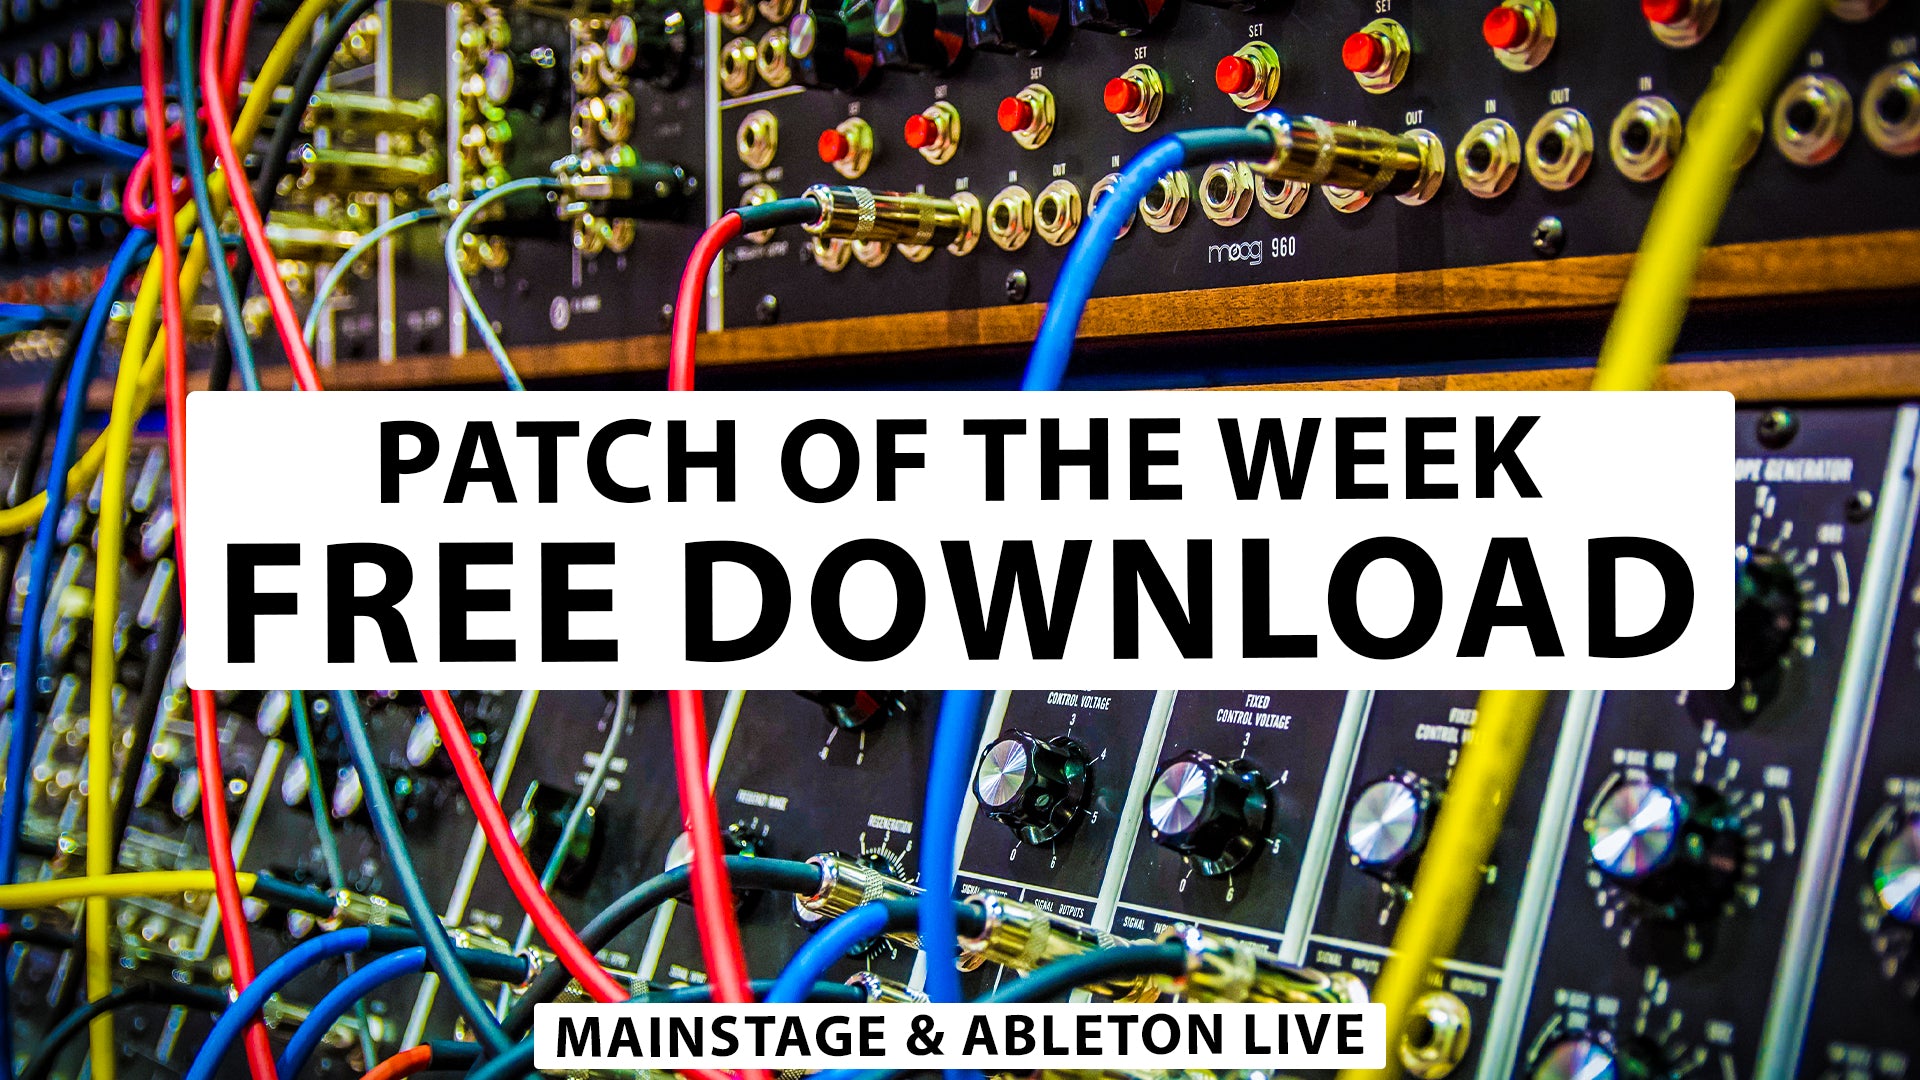 Gritty Bells - Free MainStage & Ableton Worship Patch!